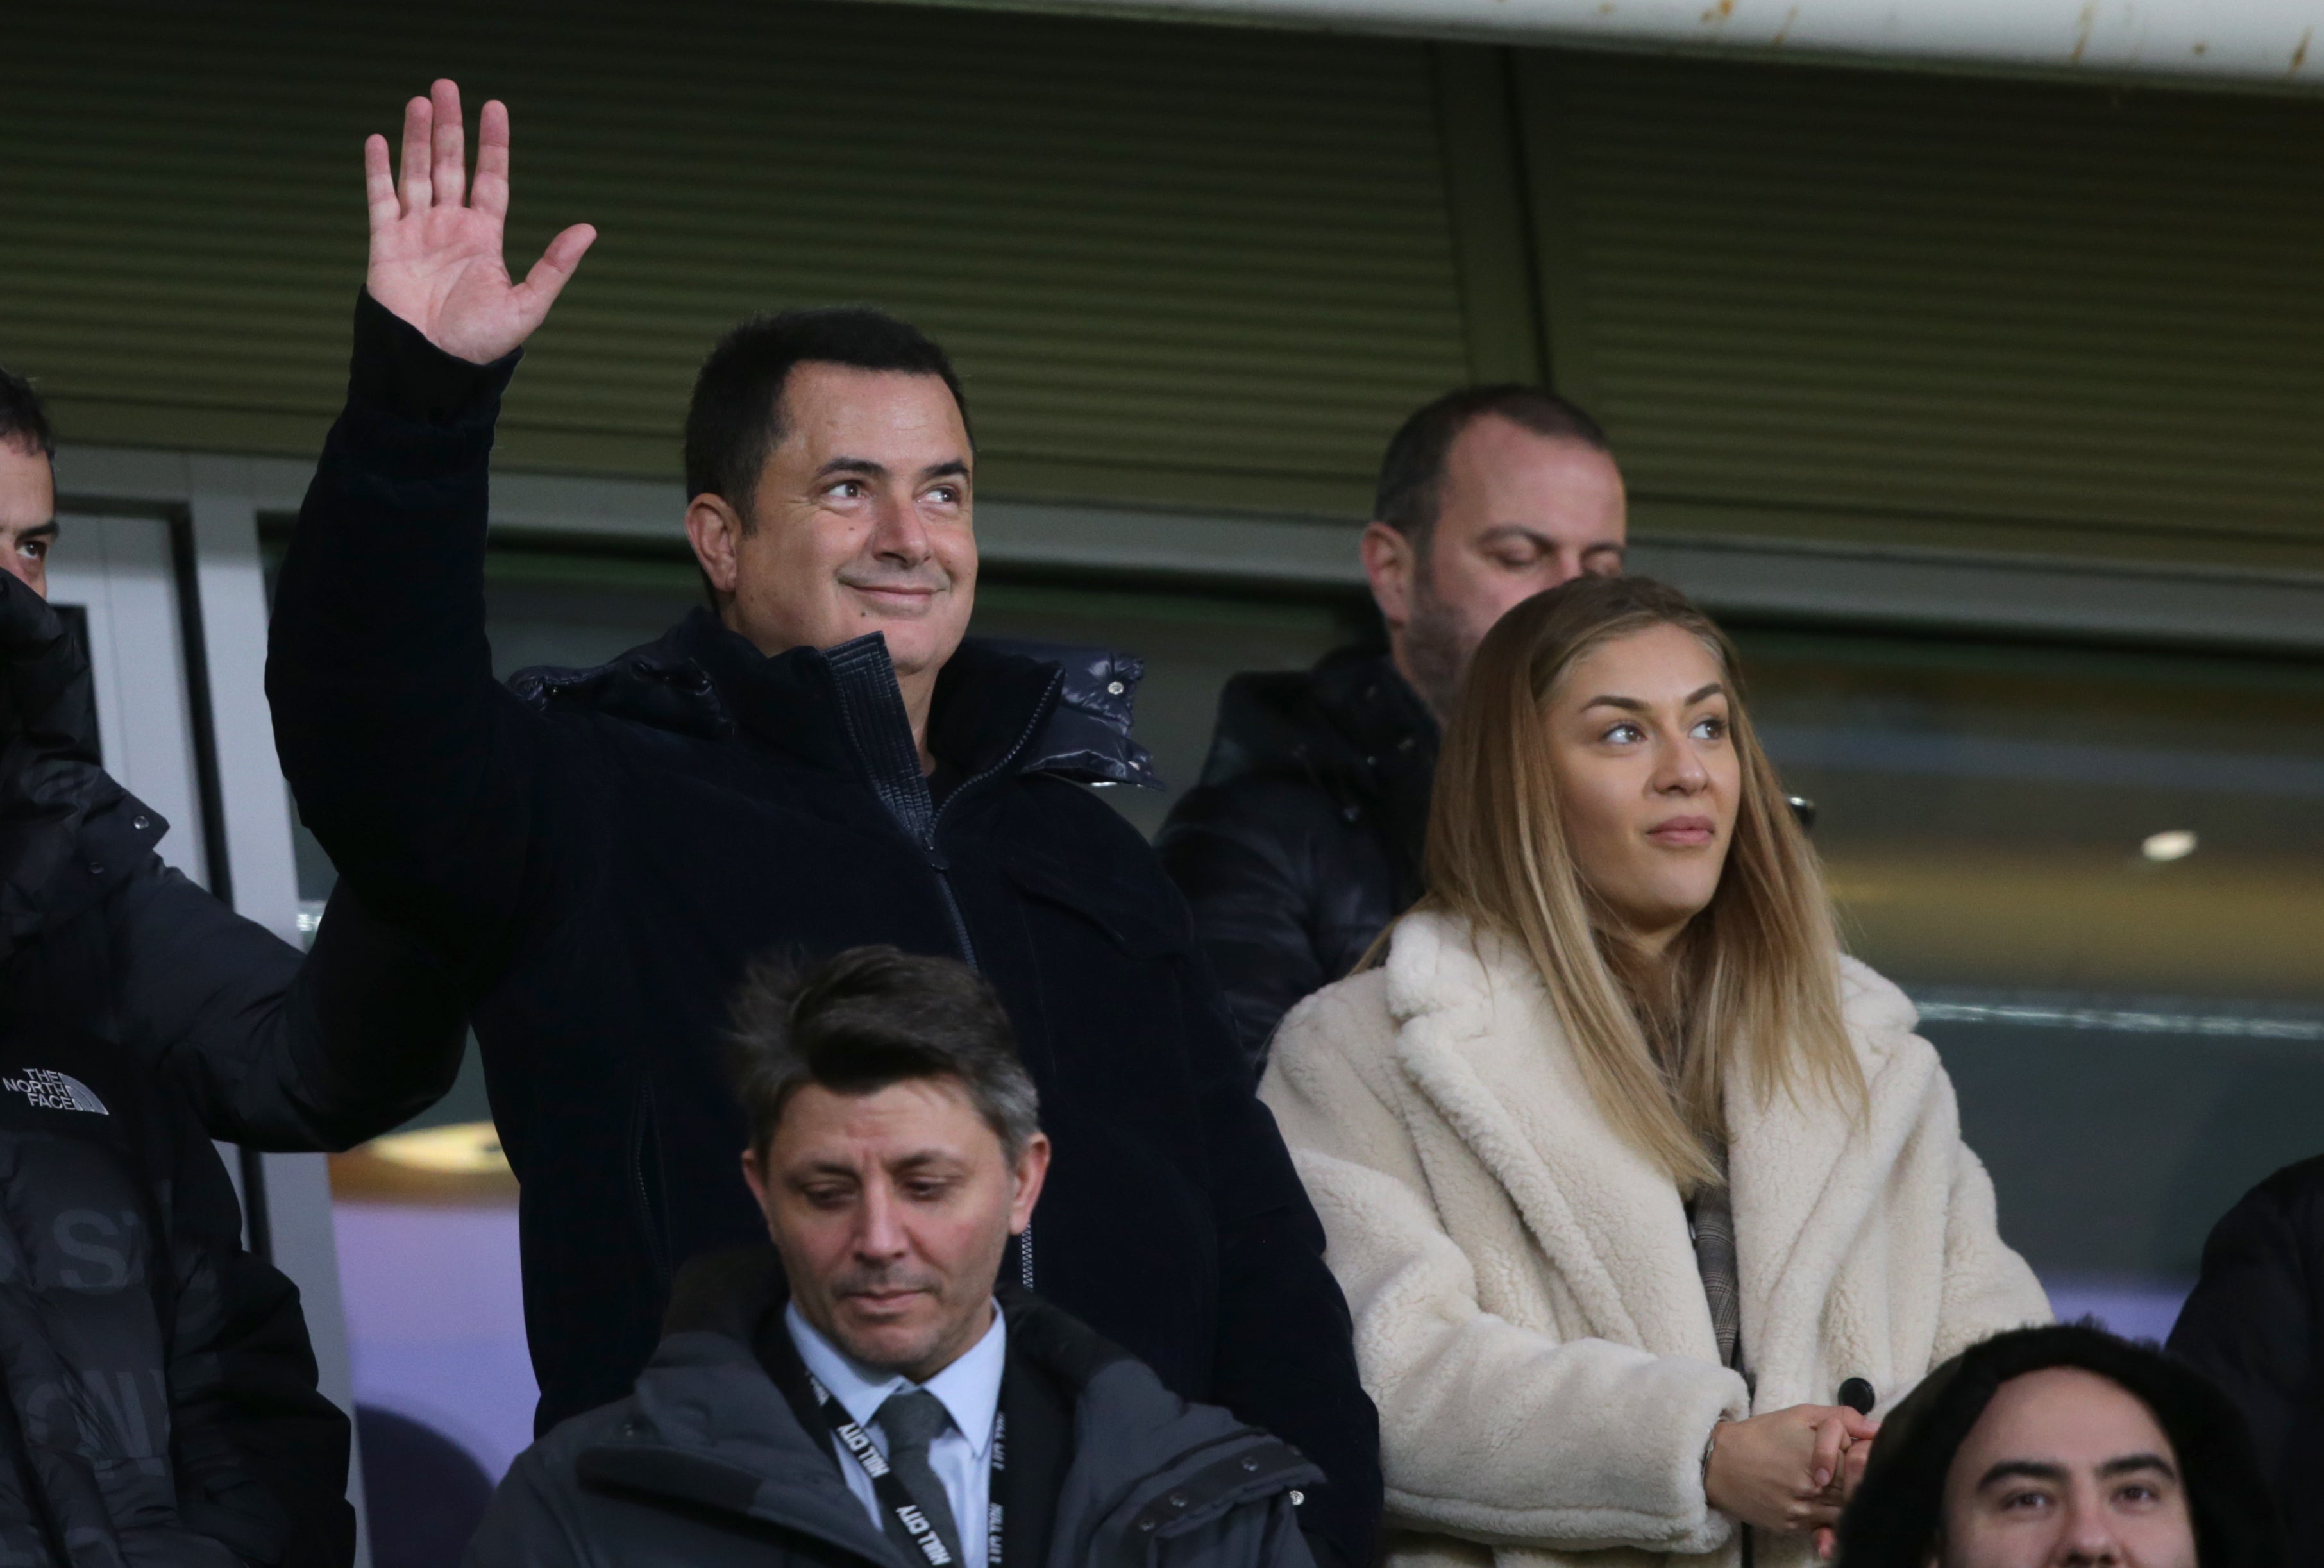 New Hull City owner Acun Ilicali watched their 2-0 win over Swansea (Ian Hodgson/PA)